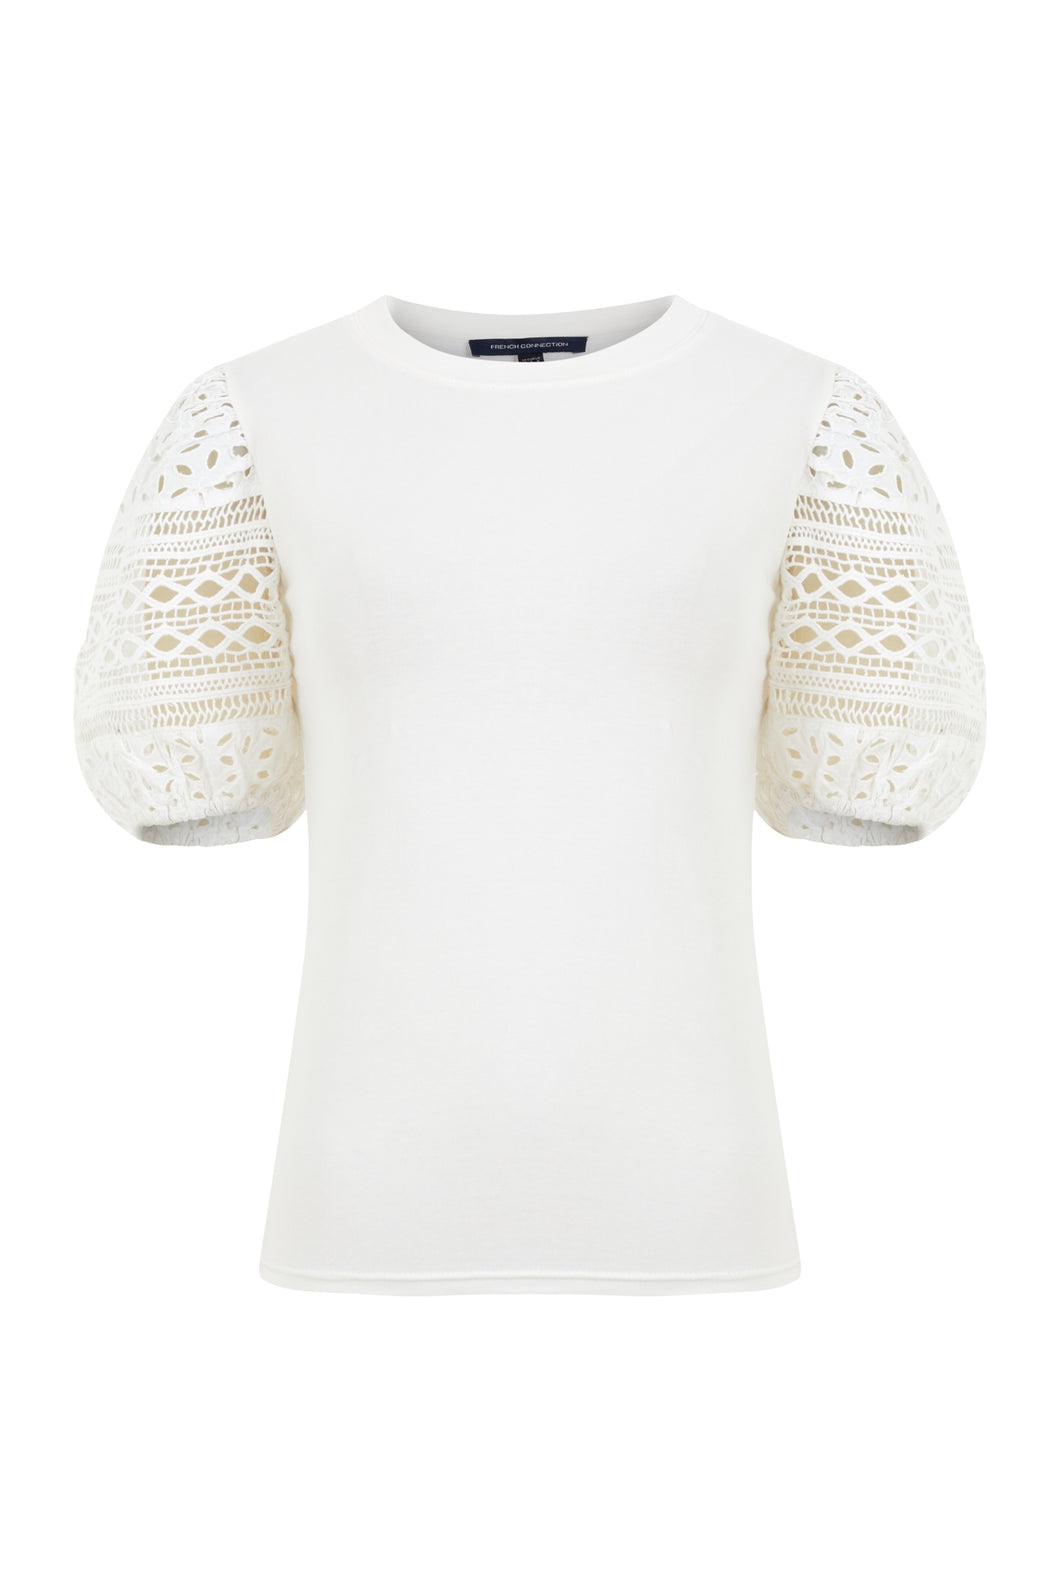 French Connection - Rosana Anges Broiderie T Shirt in White